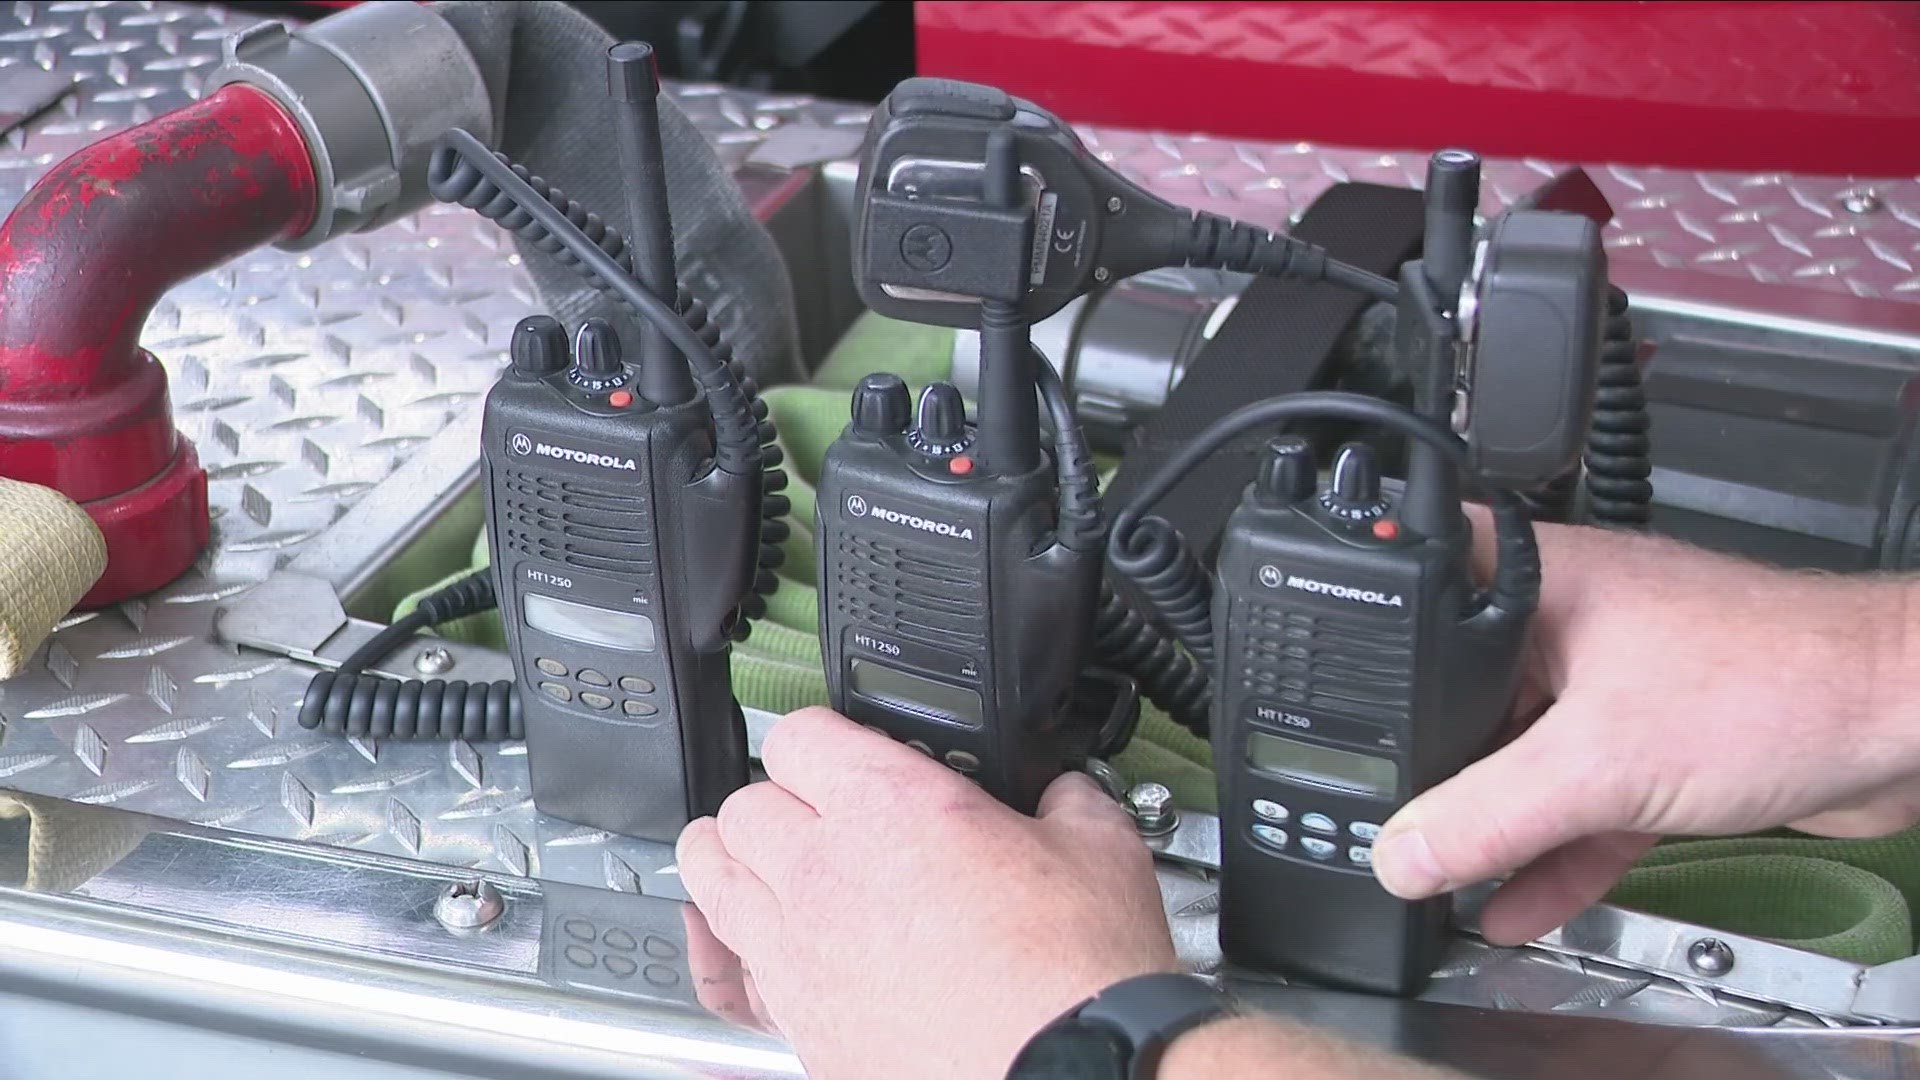 The $277,000 FEMA grant will allow the department to get rid of the radios it is currently using from 2003.